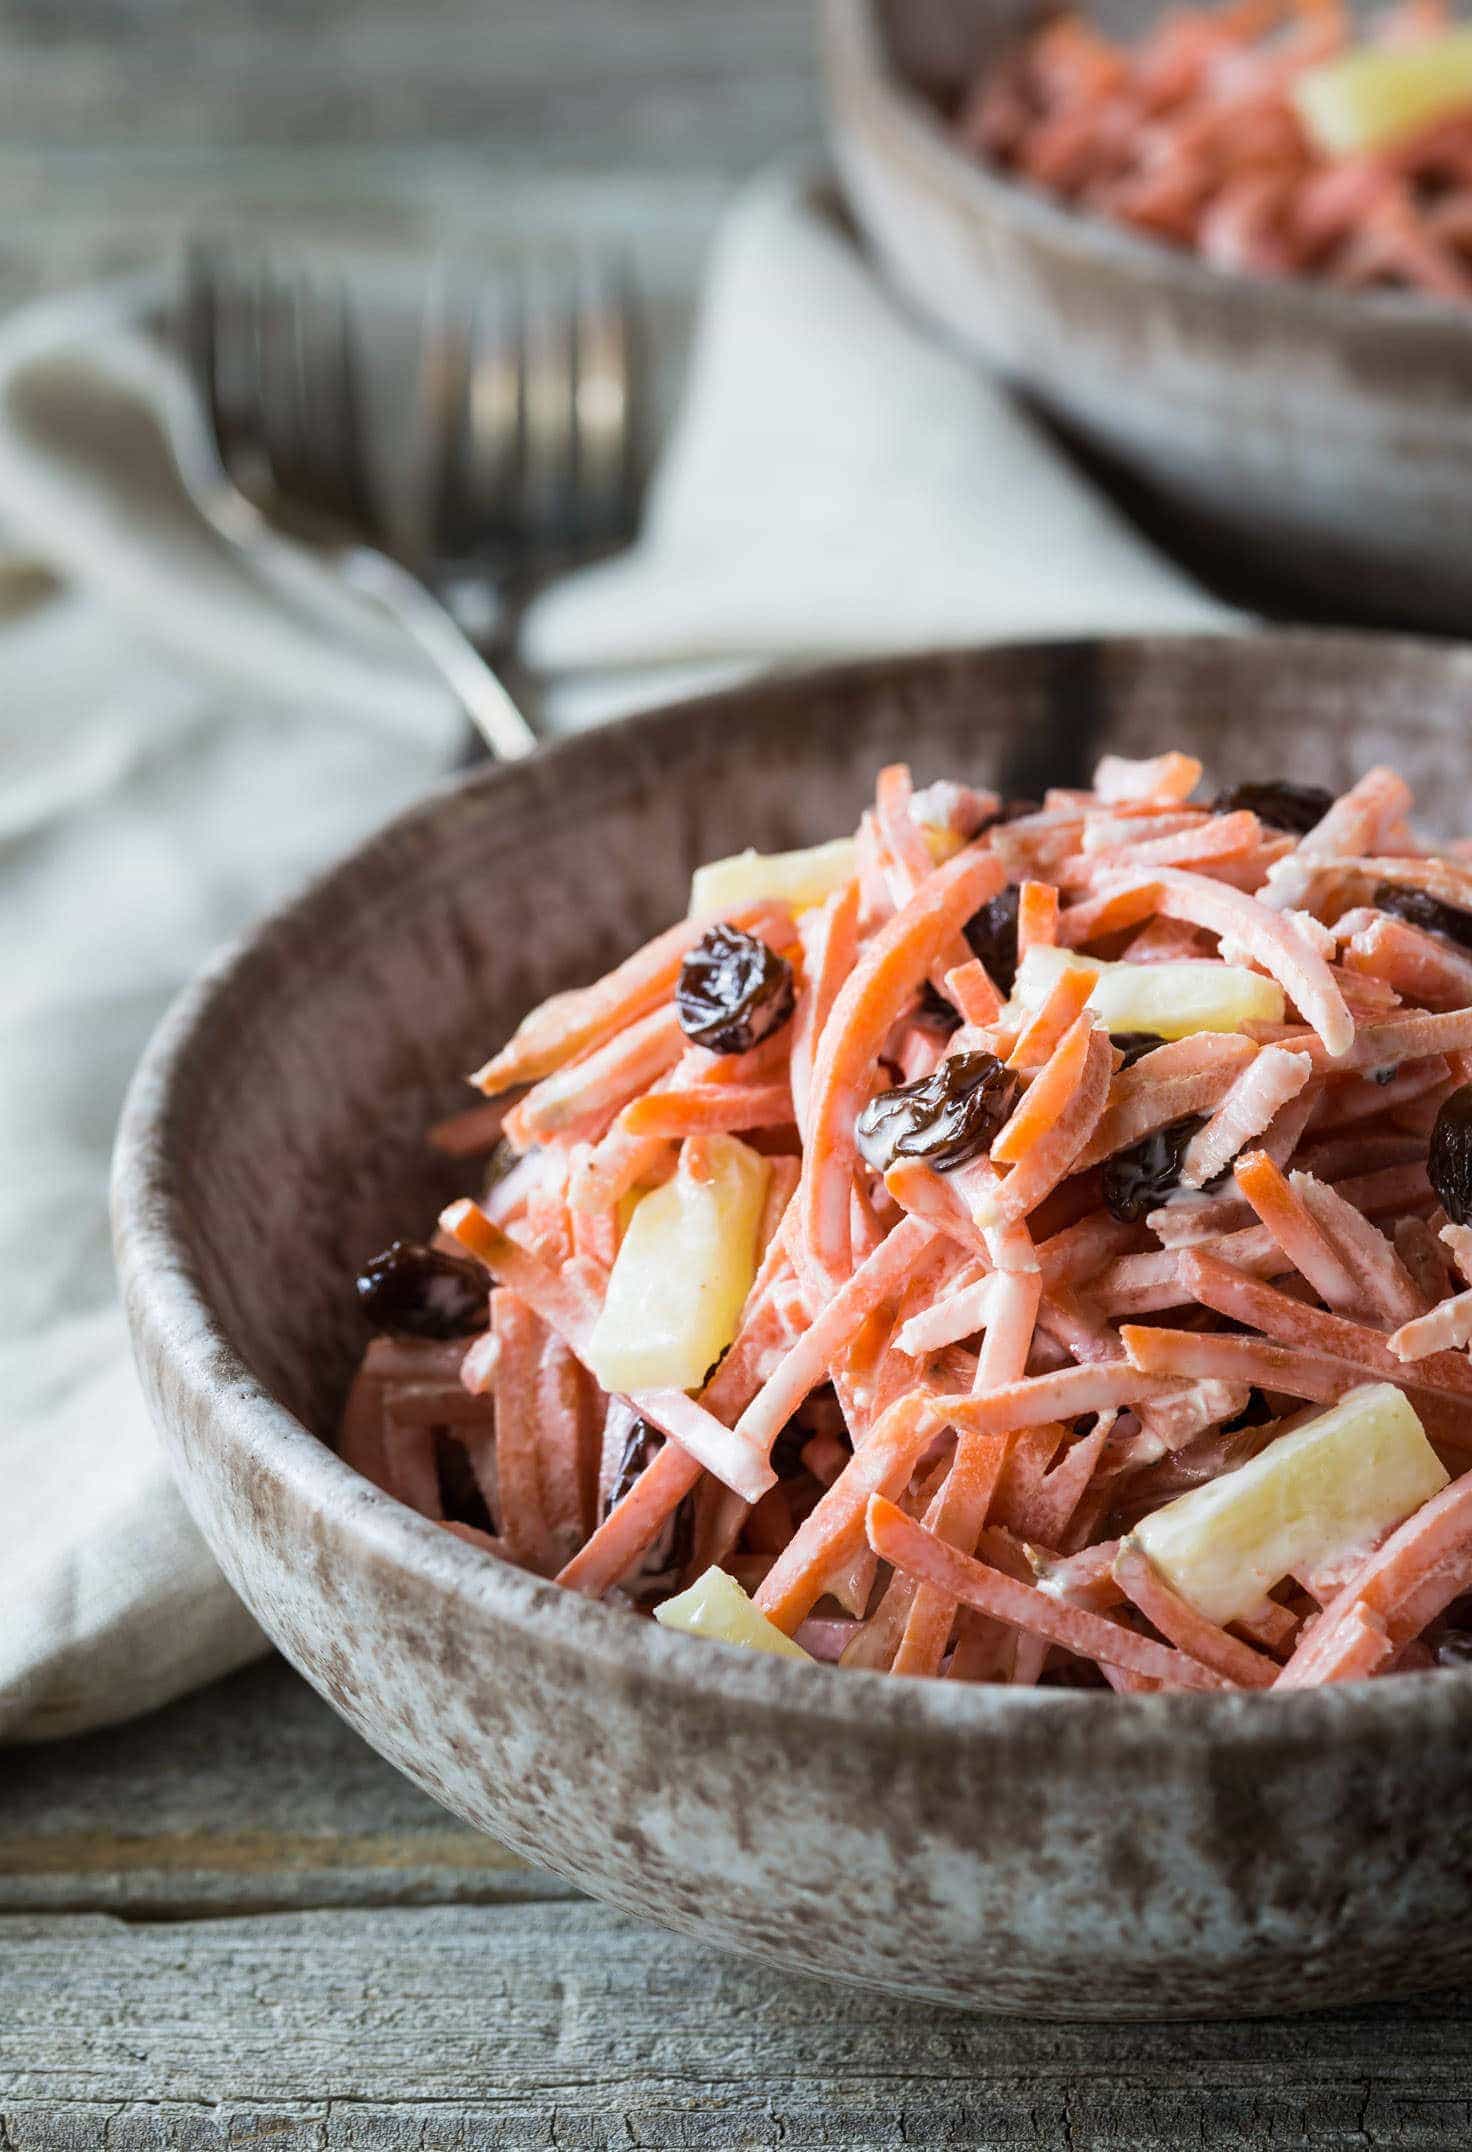 A very easy nutritious Paleo, Whole 30, and Gluten Free Carrot Raisin Pineapple Salad that requires no cooking and can be made in just a few minutes! It's vegetarian and you can make it vegan with a mayonnaise substitute.